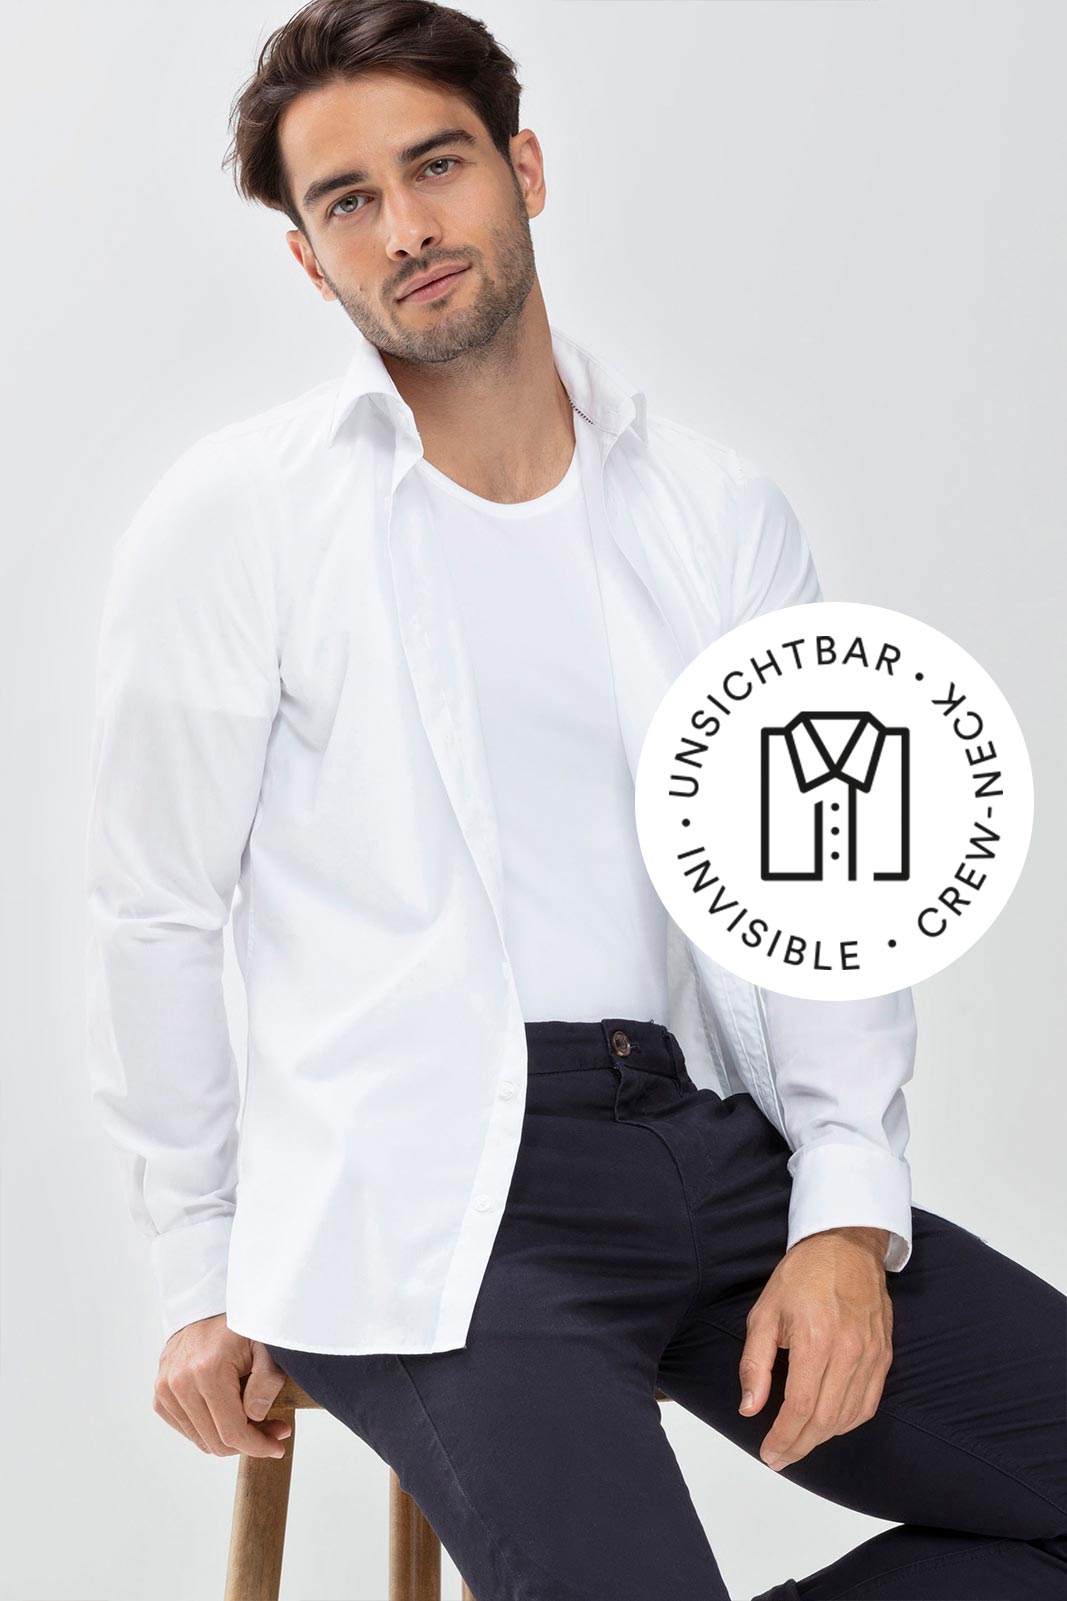 Dry Cotton Functional series, white crew neck shirt on the model with an open white shirt over it | mey®,  icon for invisible crew neck shirt: folded shirt with buttoned-up collar | mey®